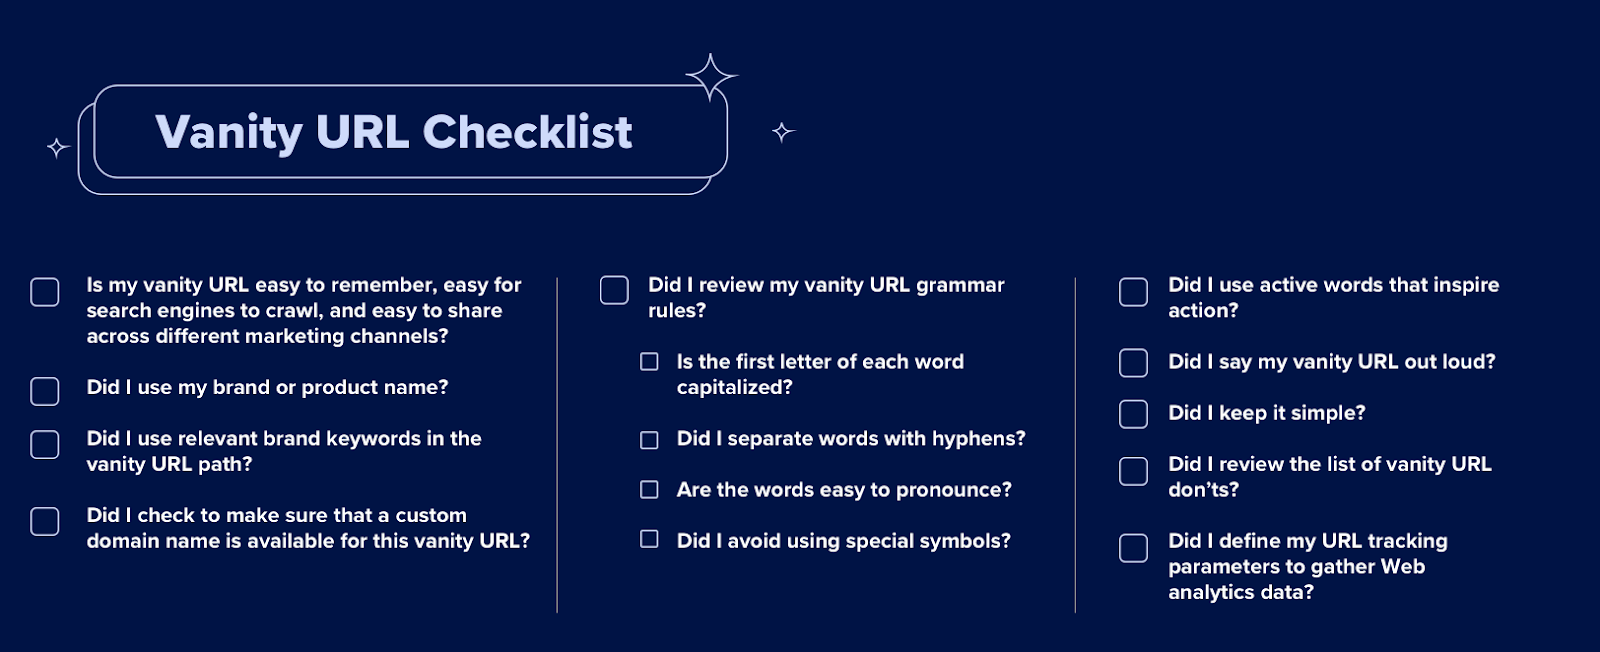 A checklist for people who want to create a vanity URL that includes ways to avoid common mistakes